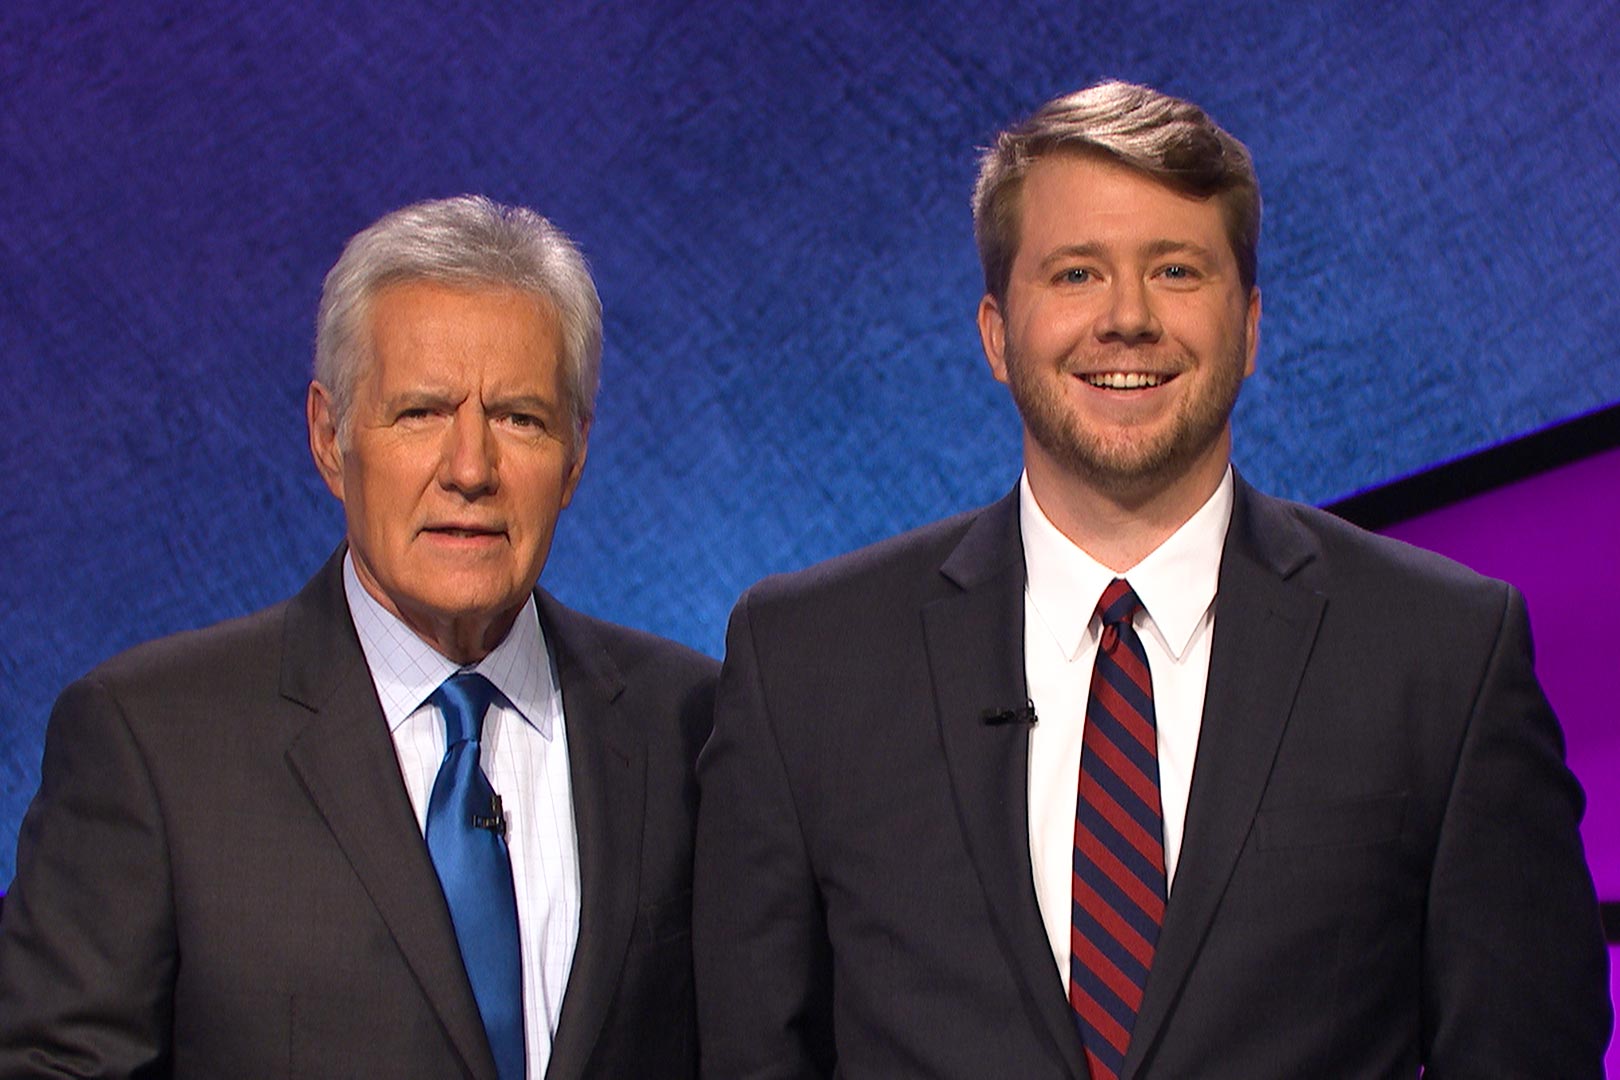 Terry Hanlon poses with Alex Trebek on the set of “Jeopardy!”